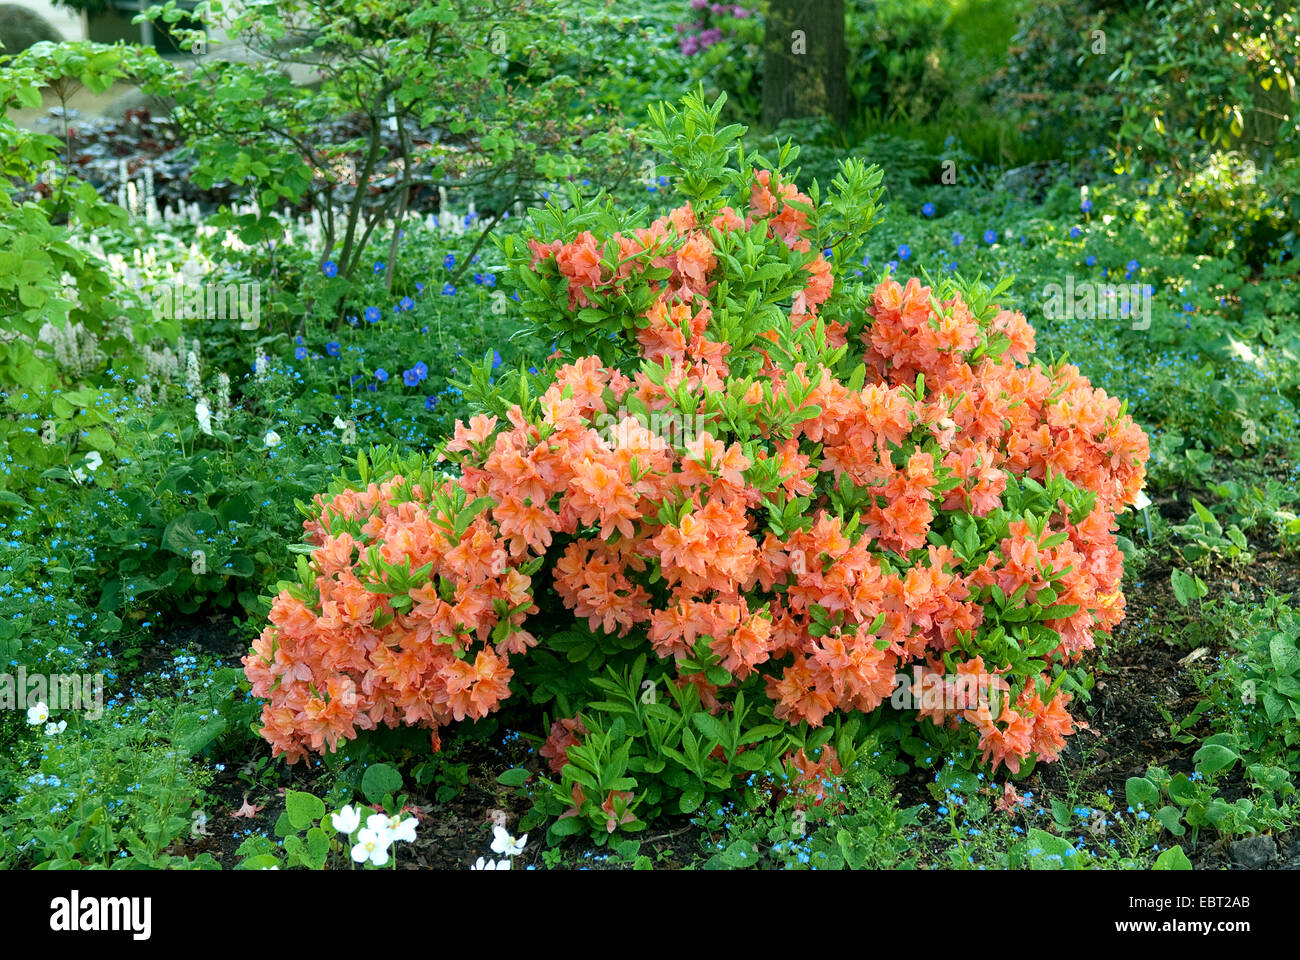 rhododendron (Rhododendron 'Polly Claessens', Rhododendron Polly Claessens), cultivar Polly Claessens Stock Photo